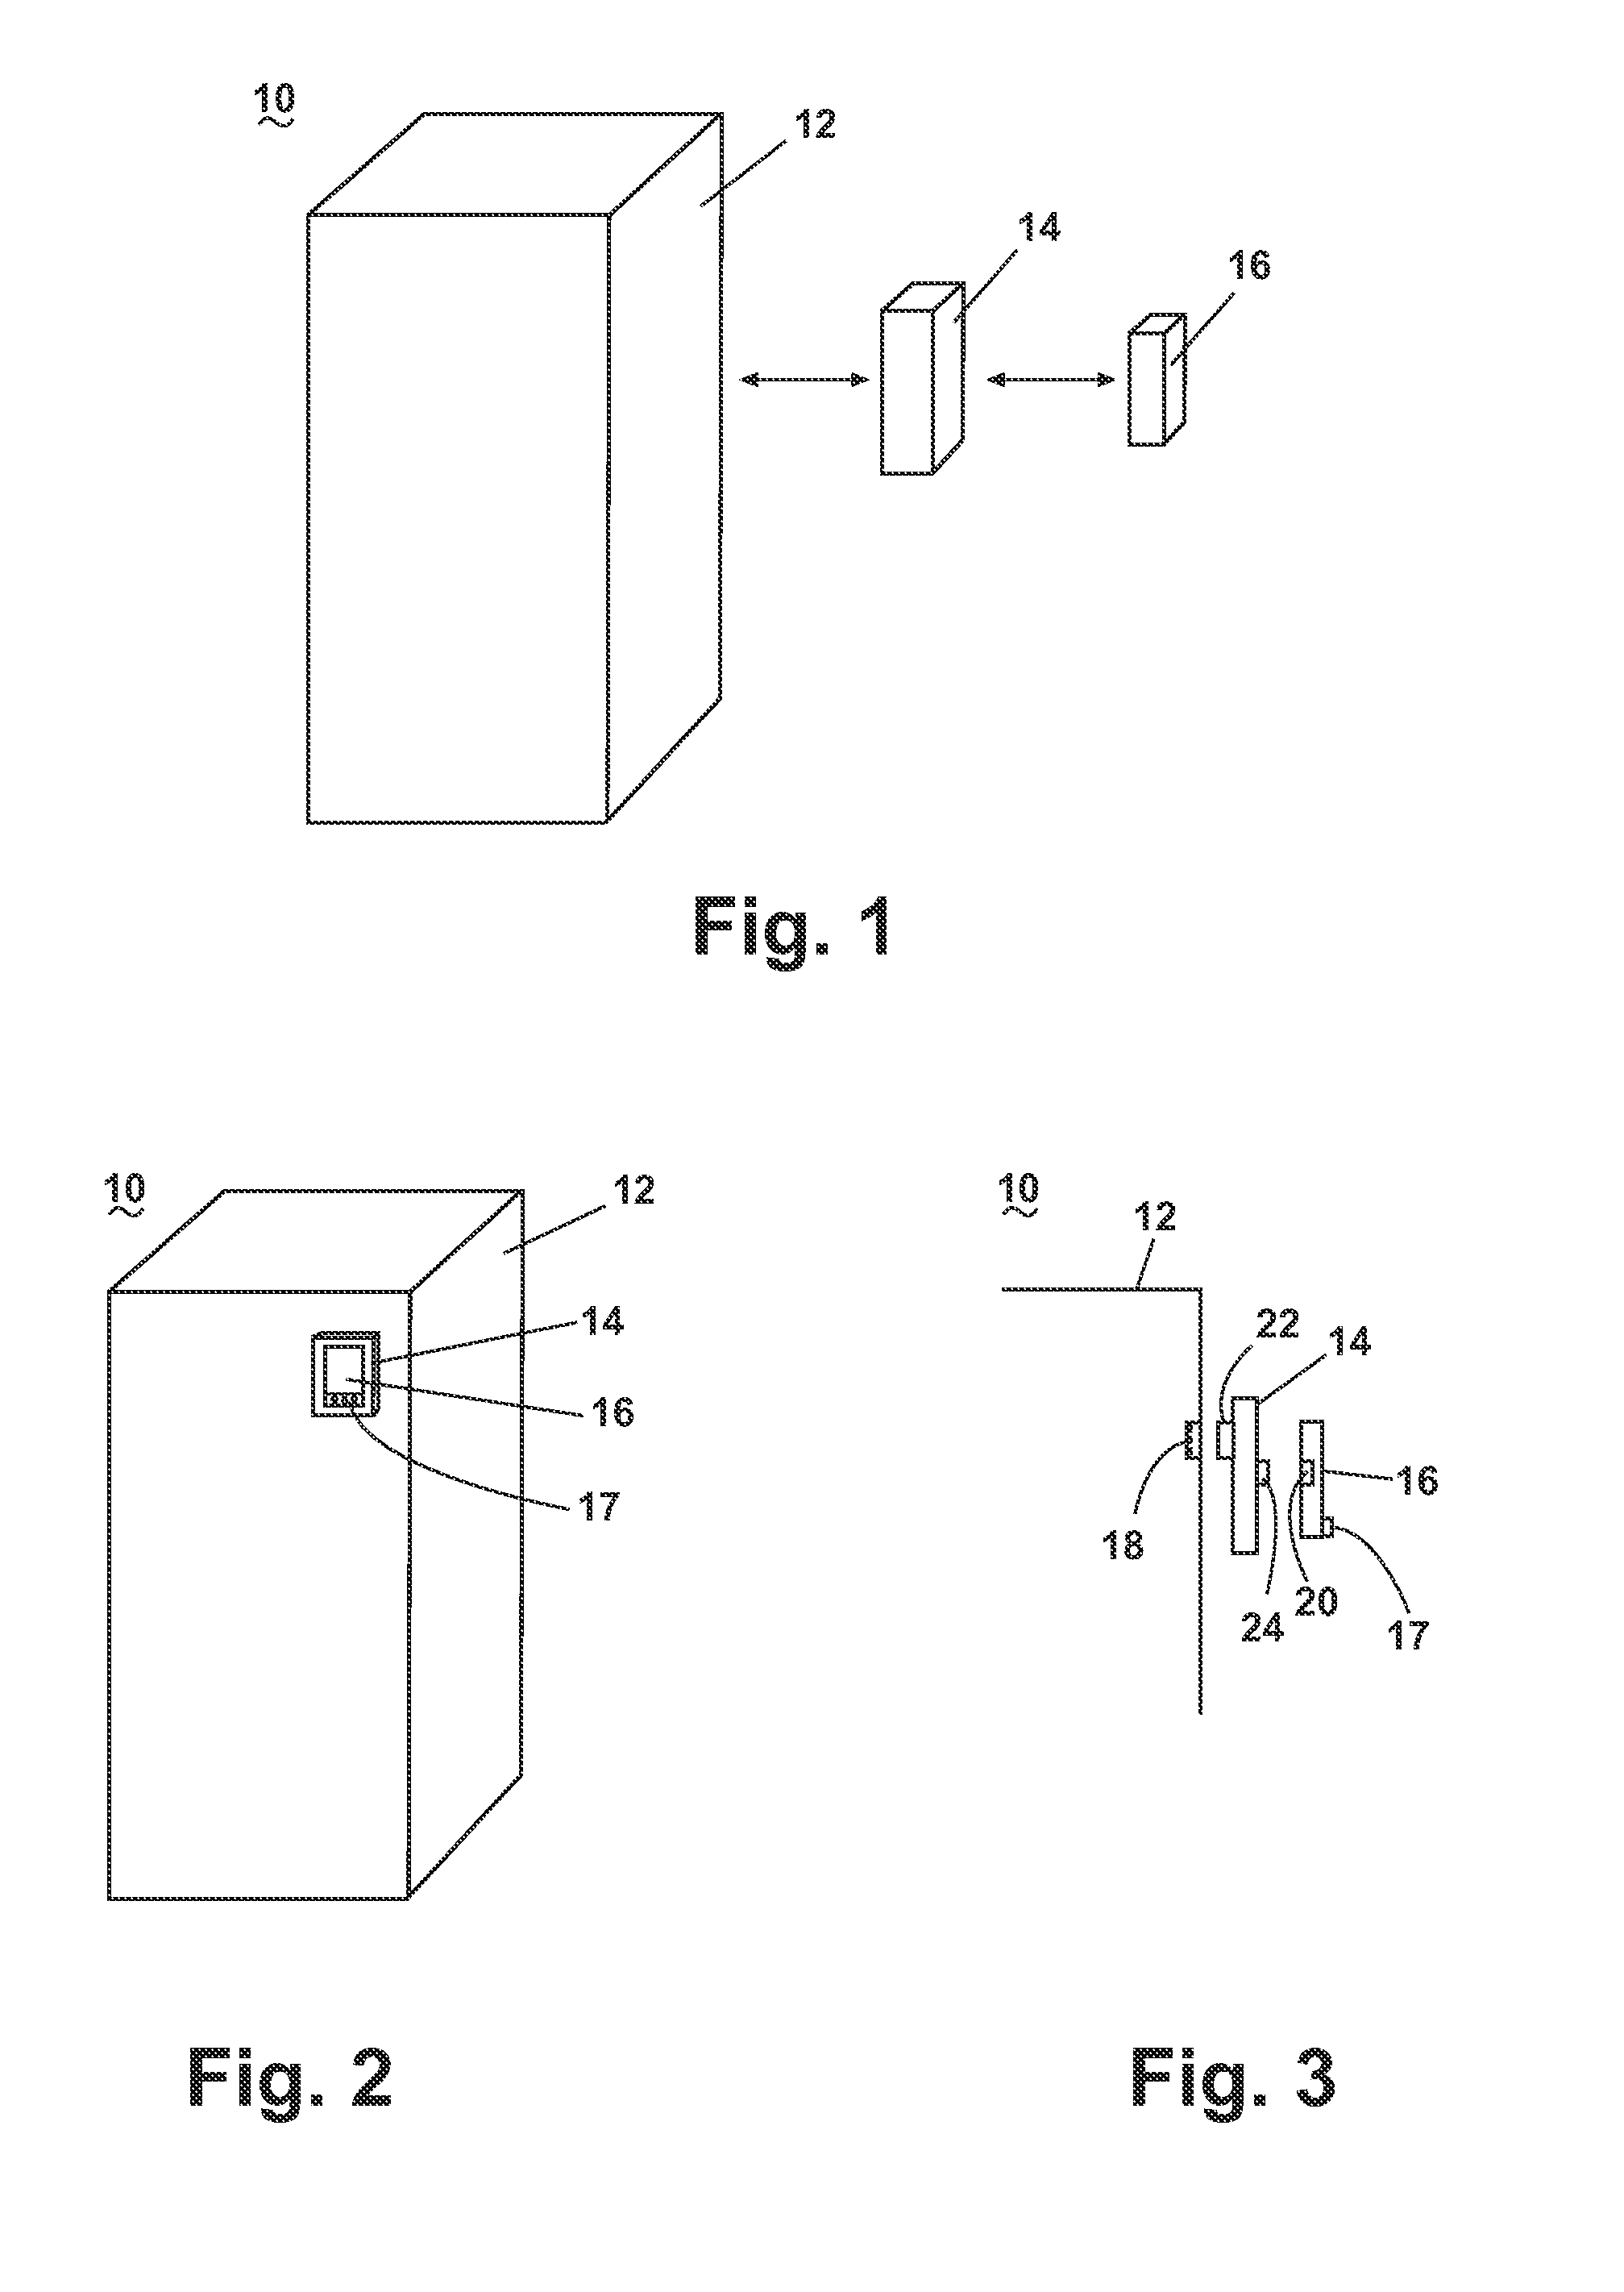 System for Supplying Service From an Appliance To Multiple Consumer Electronic Devices